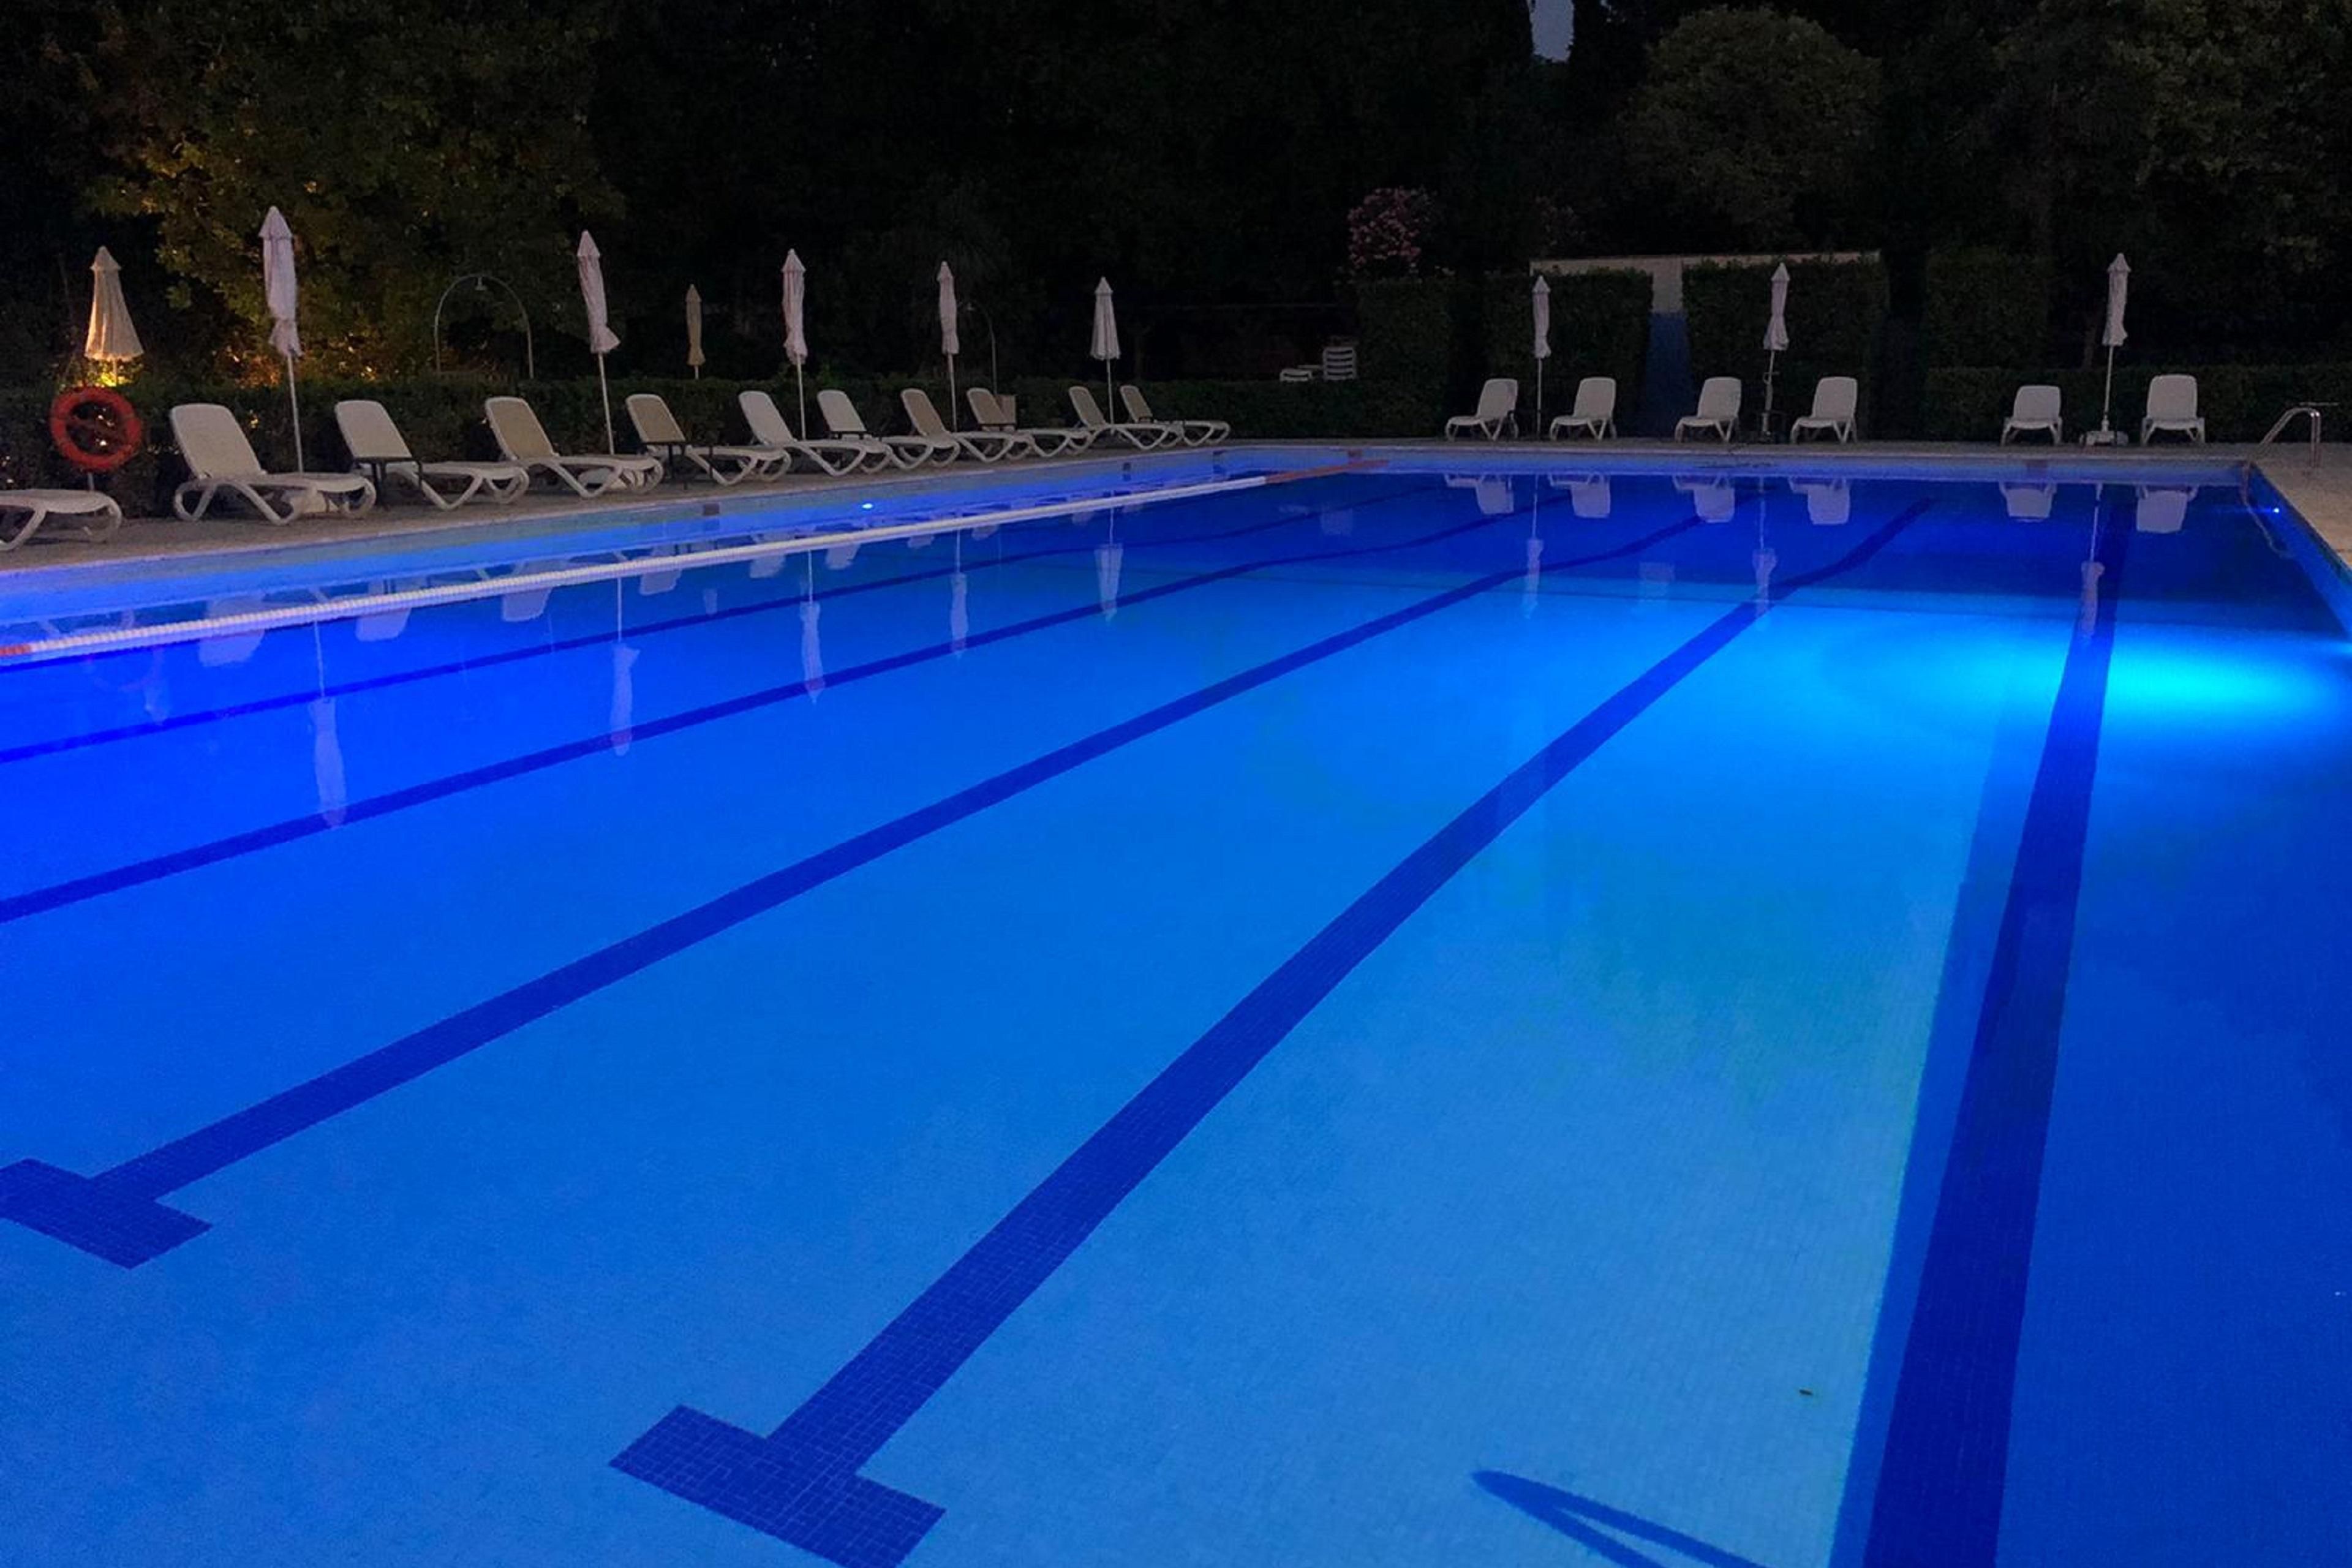 Swimming Pool by night